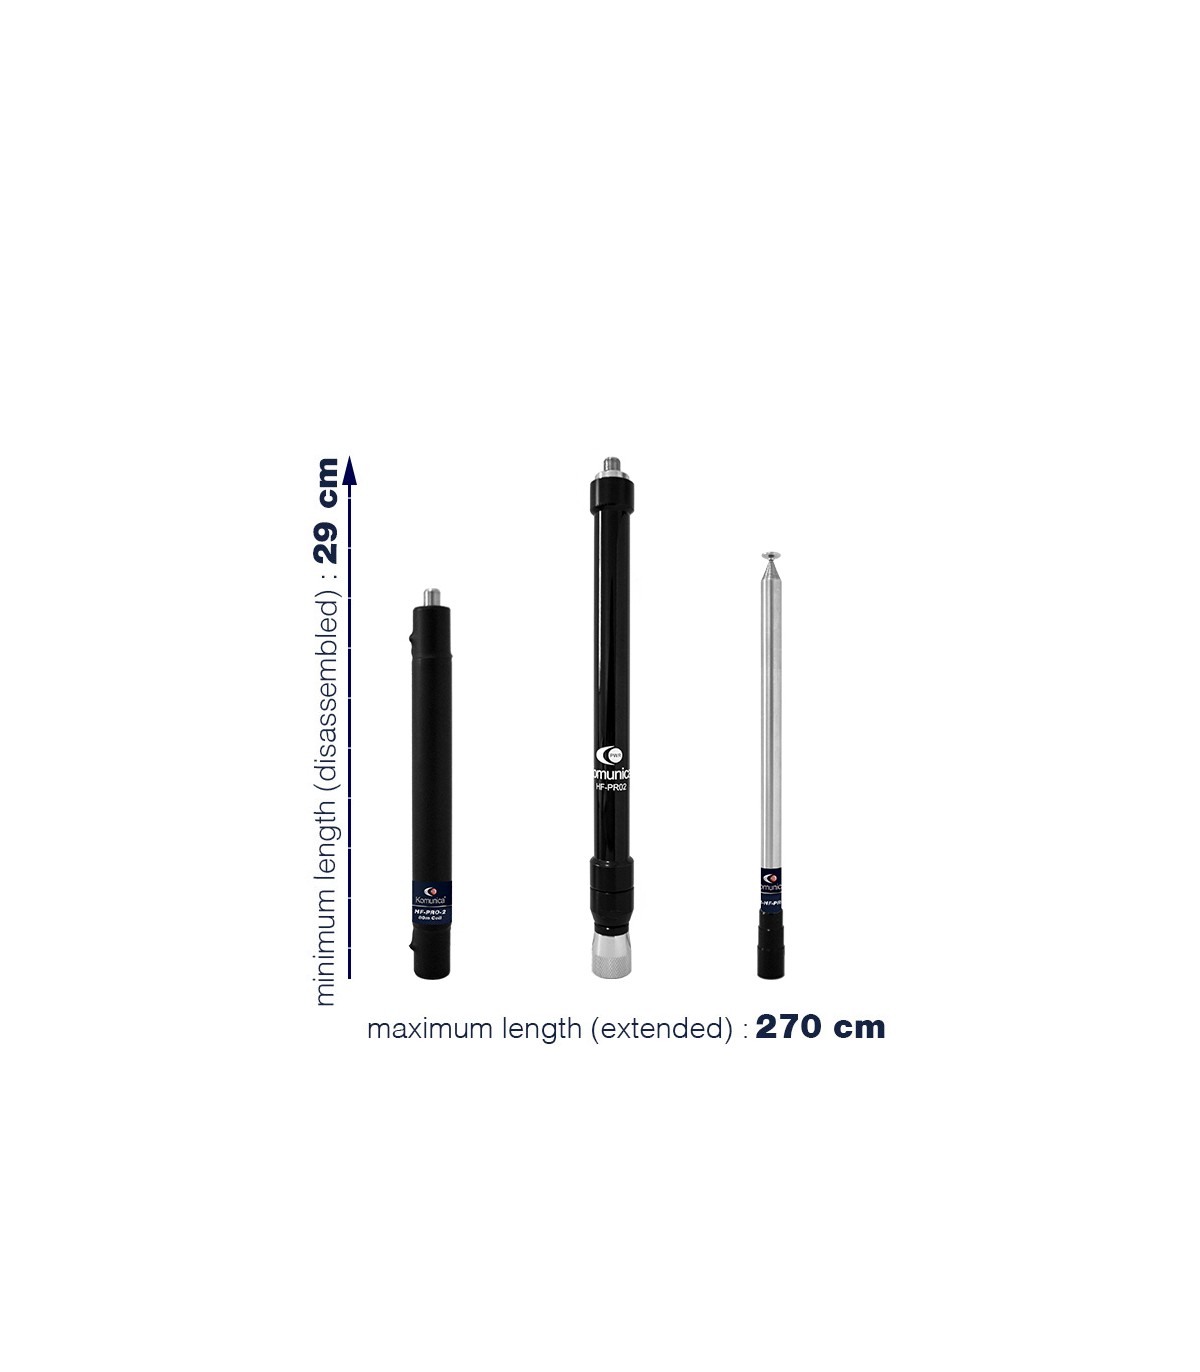 https://komunicapower.com/4261-superlarge_default/komunica-portable-multi-band-antenna-730mhz-50mhz-35mhz-with-coil-included-vhf-pl-259.jpg